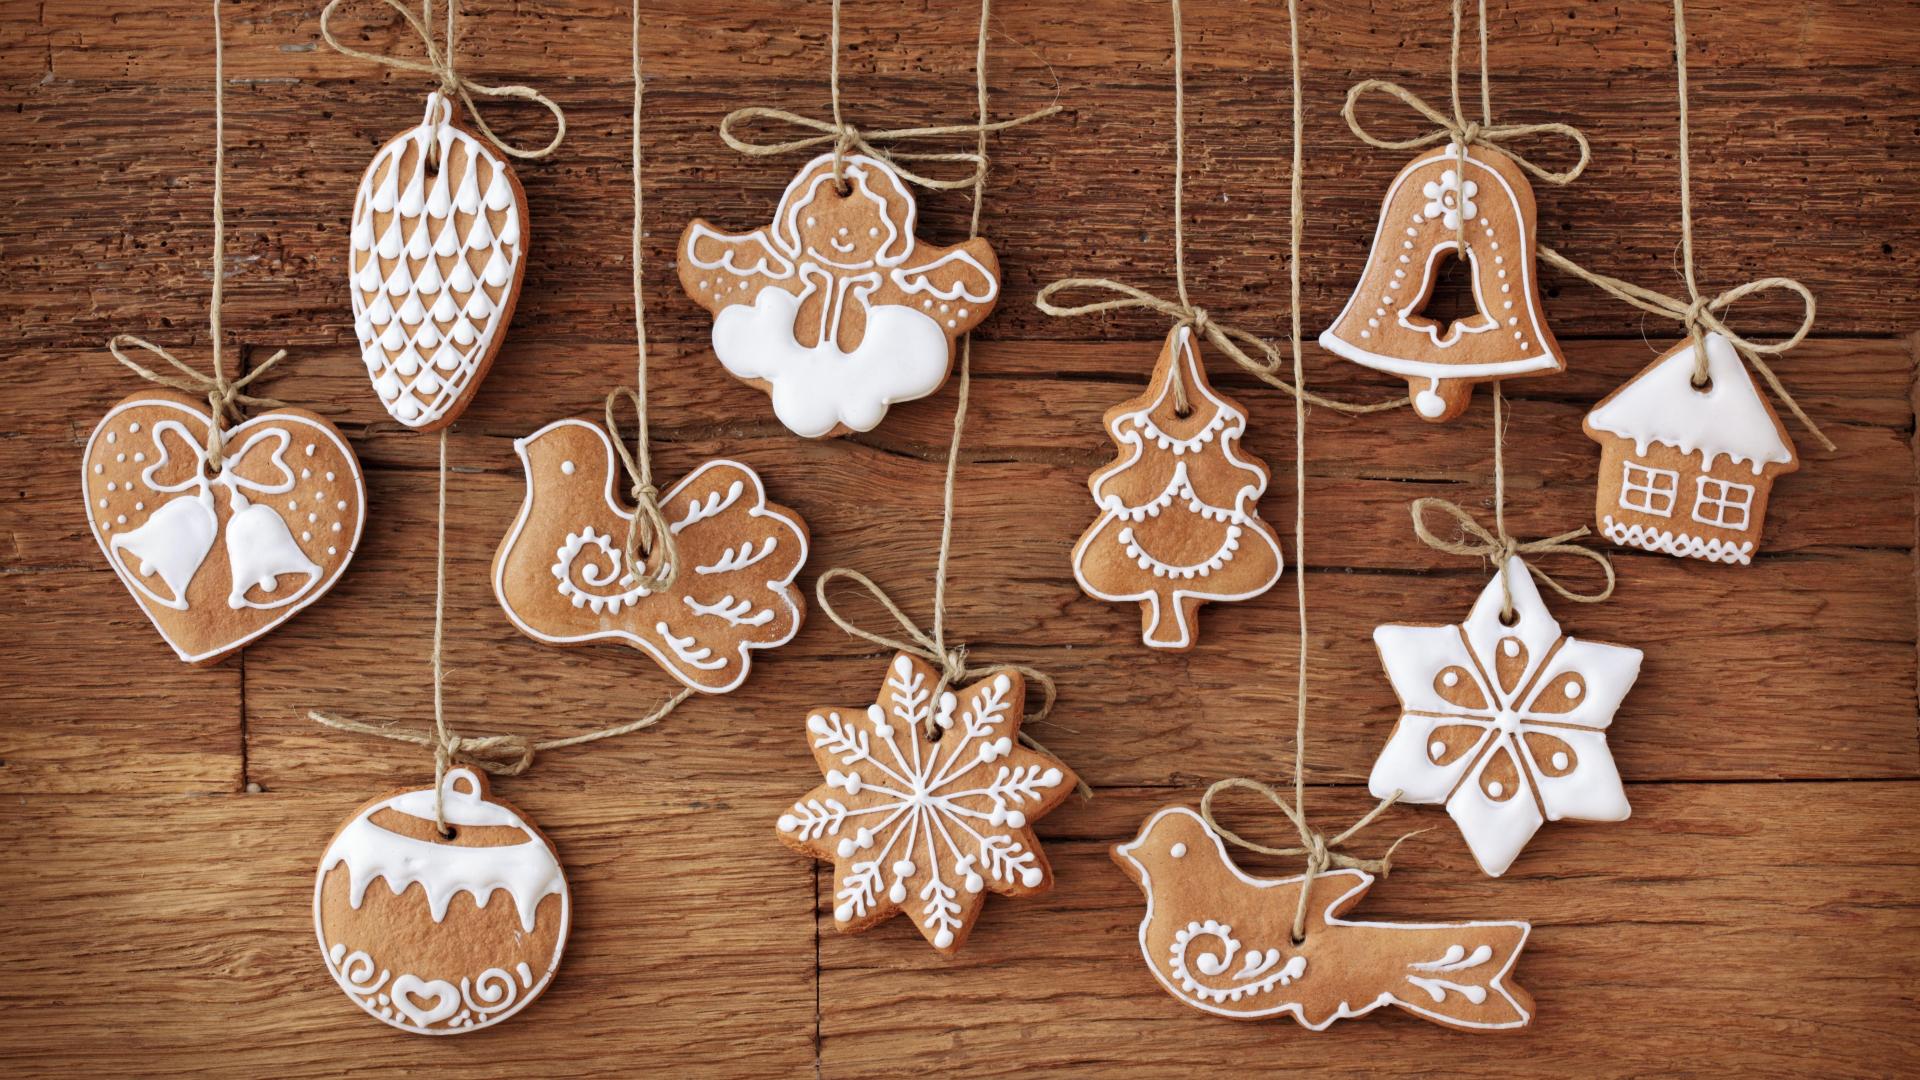 Christmas Cookies. +14. Wallpaper Category : Abstract & Vector HD resolutions (16:9): 1366x768 1600x900 1920x1080